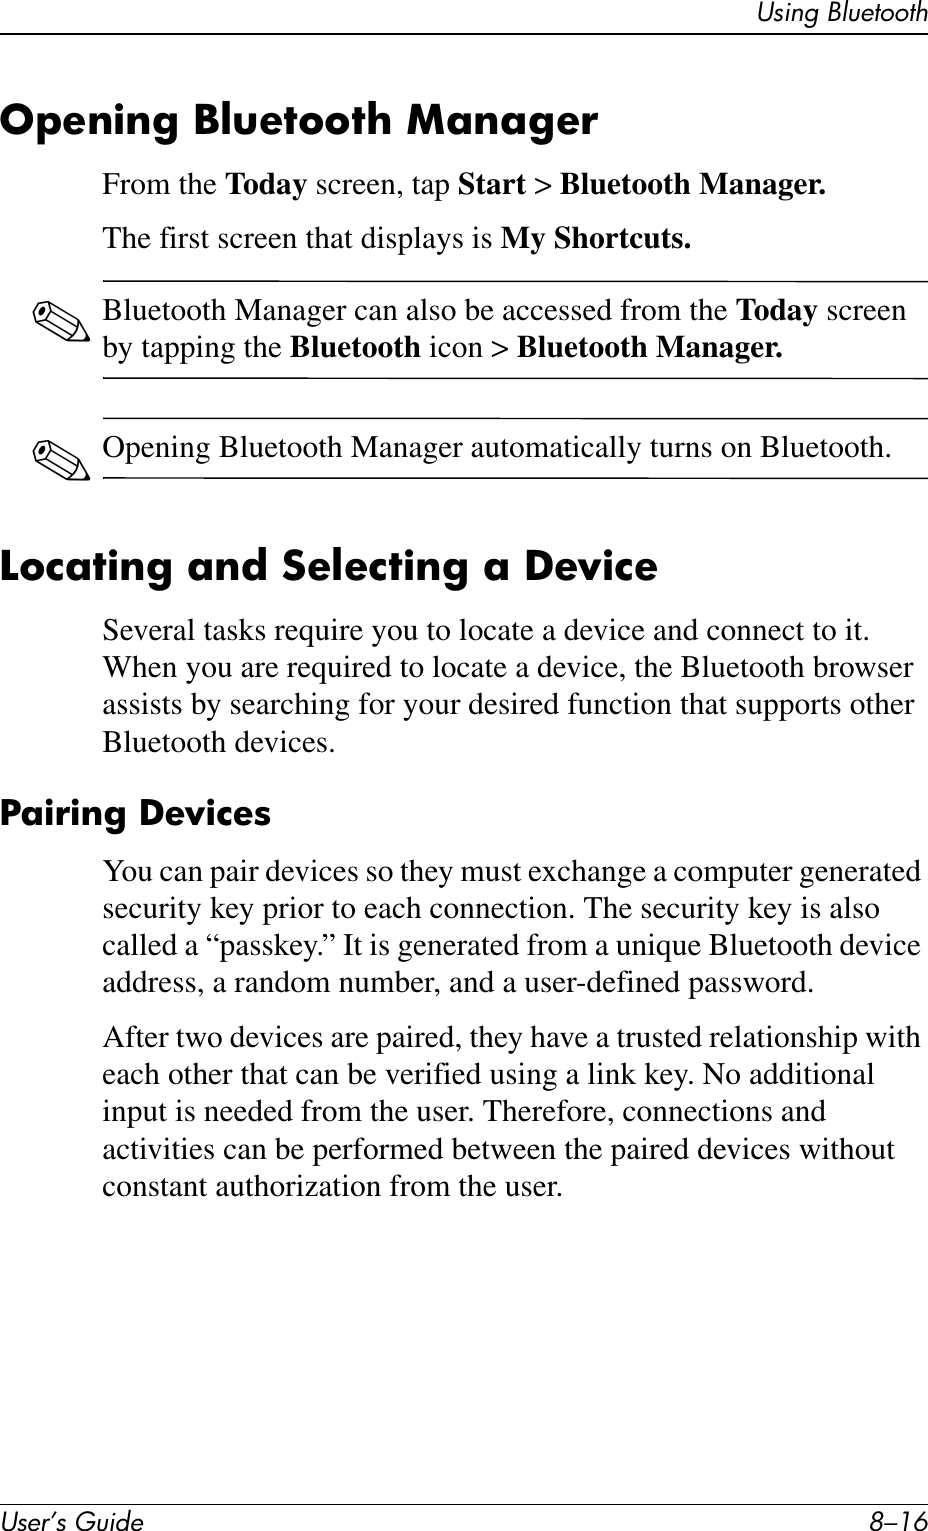 User’s Guide 8–16Using BluetoothOpening Bluetooth ManagerFrom the Today screen, tap Start &gt; Bluetooth Manager.The first screen that displays is My Shortcuts.✎Bluetooth Manager can also be accessed from the Today screen by tapping the Bluetooth icon &gt; Bluetooth Manager.✎Opening Bluetooth Manager automatically turns on Bluetooth.Locating and Selecting a DeviceSeveral tasks require you to locate a device and connect to it. When you are required to locate a device, the Bluetooth browser assists by searching for your desired function that supports other Bluetooth devices.Pairing DevicesYou can pair devices so they must exchange a computer generated security key prior to each connection. The security key is also called a “passkey.” It is generated from a unique Bluetooth device address, a random number, and a user-defined password.After two devices are paired, they have a trusted relationship with each other that can be verified using a link key. No additional input is needed from the user. Therefore, connections and activities can be performed between the paired devices without constant authorization from the user.